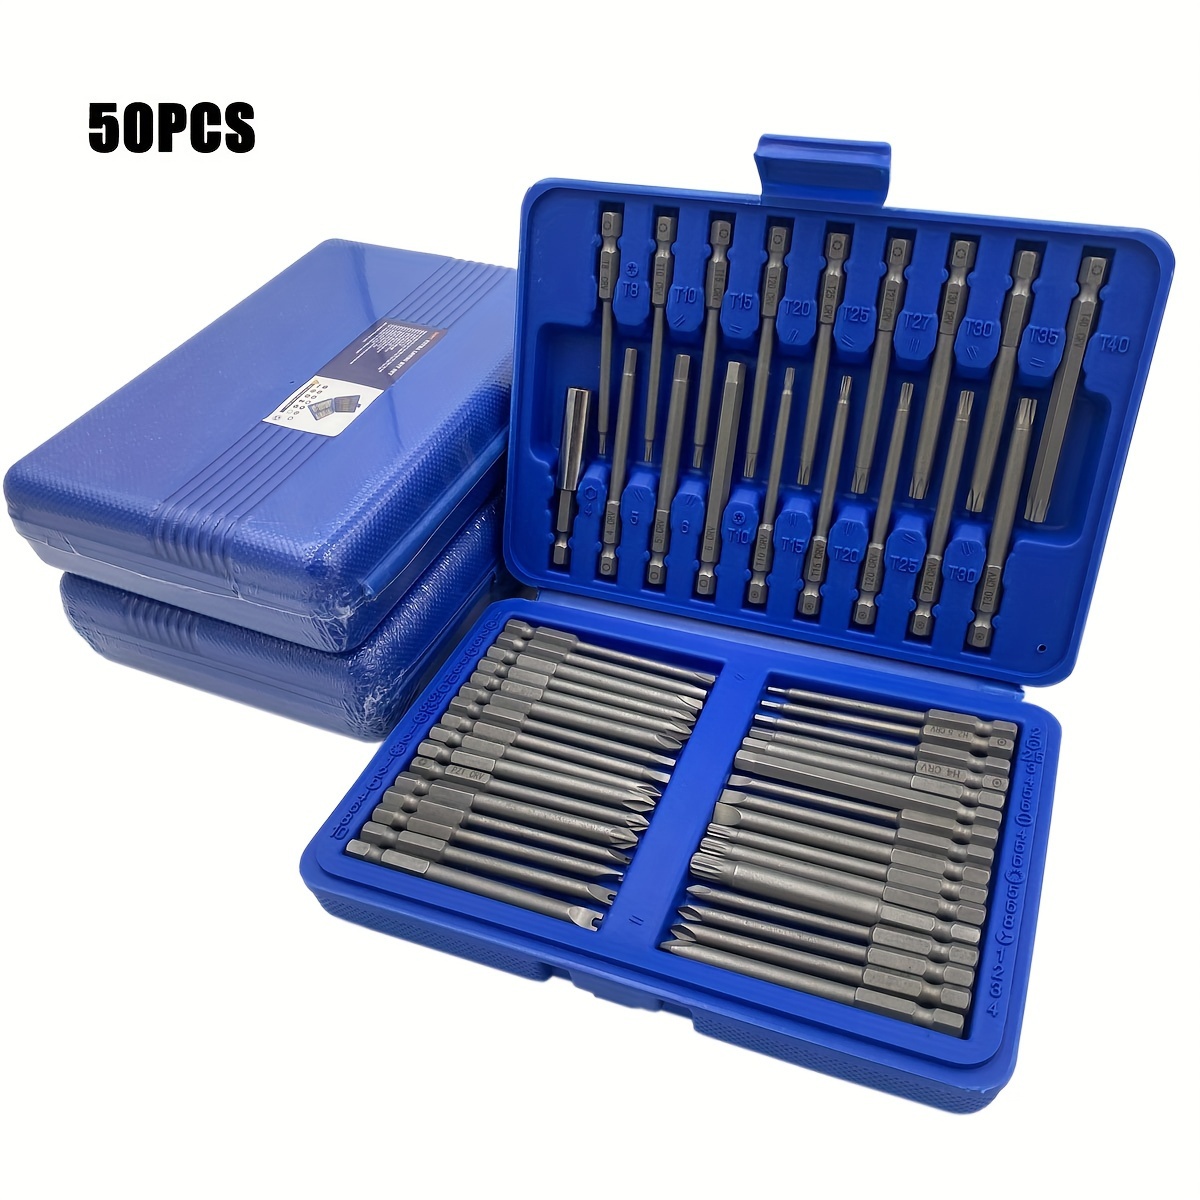 

50pcs Precision Screwdriver Bit Set - Durable Steel, Security & Extra Long Magnetic Bits - Multipurpose Drill Bit Kit With Hex, Torx, Spanner, Square Head Styles & Carrying Case